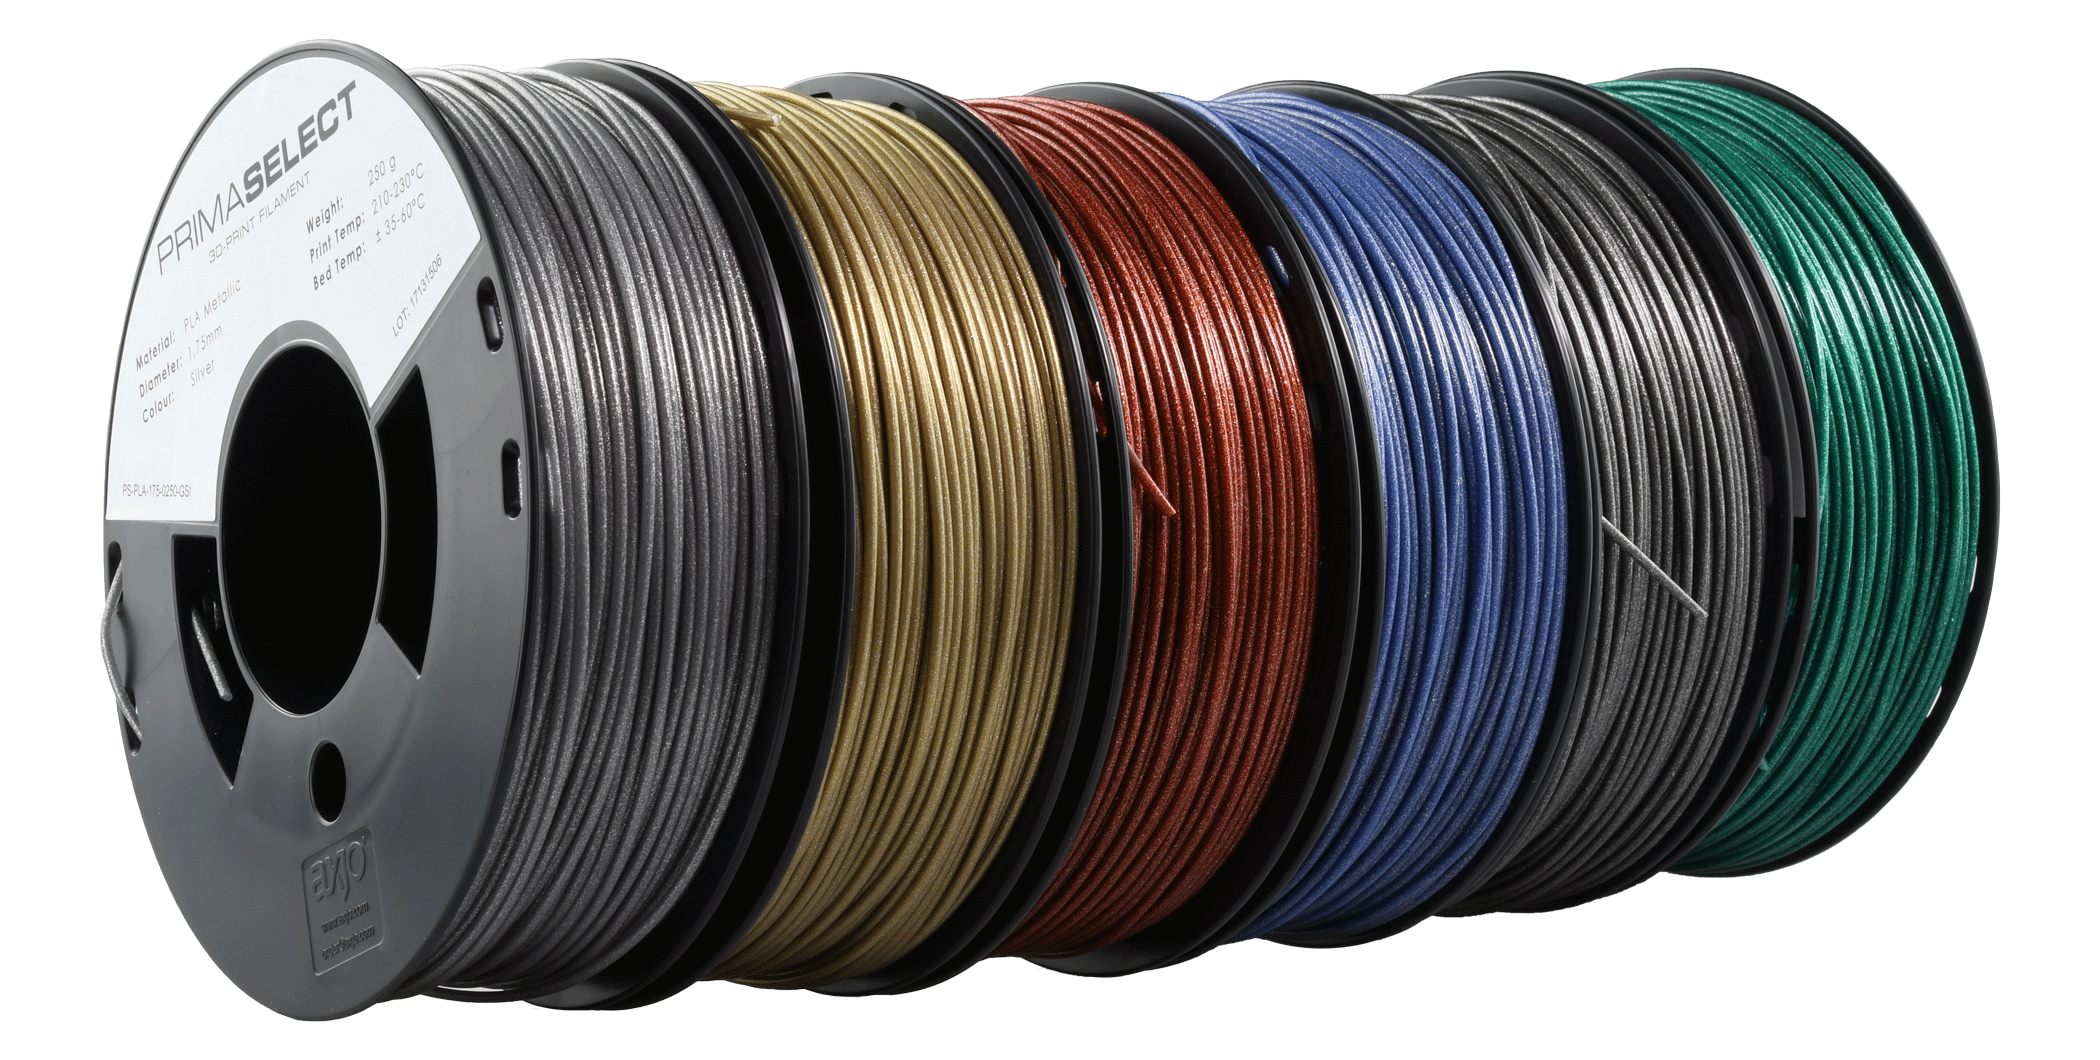 PRIMASELECT PLA - 1.75MM - 6 X 250 G - METALLIC PACK (RED, GREEN, BLUE, SILVER, GOLD, GREY)